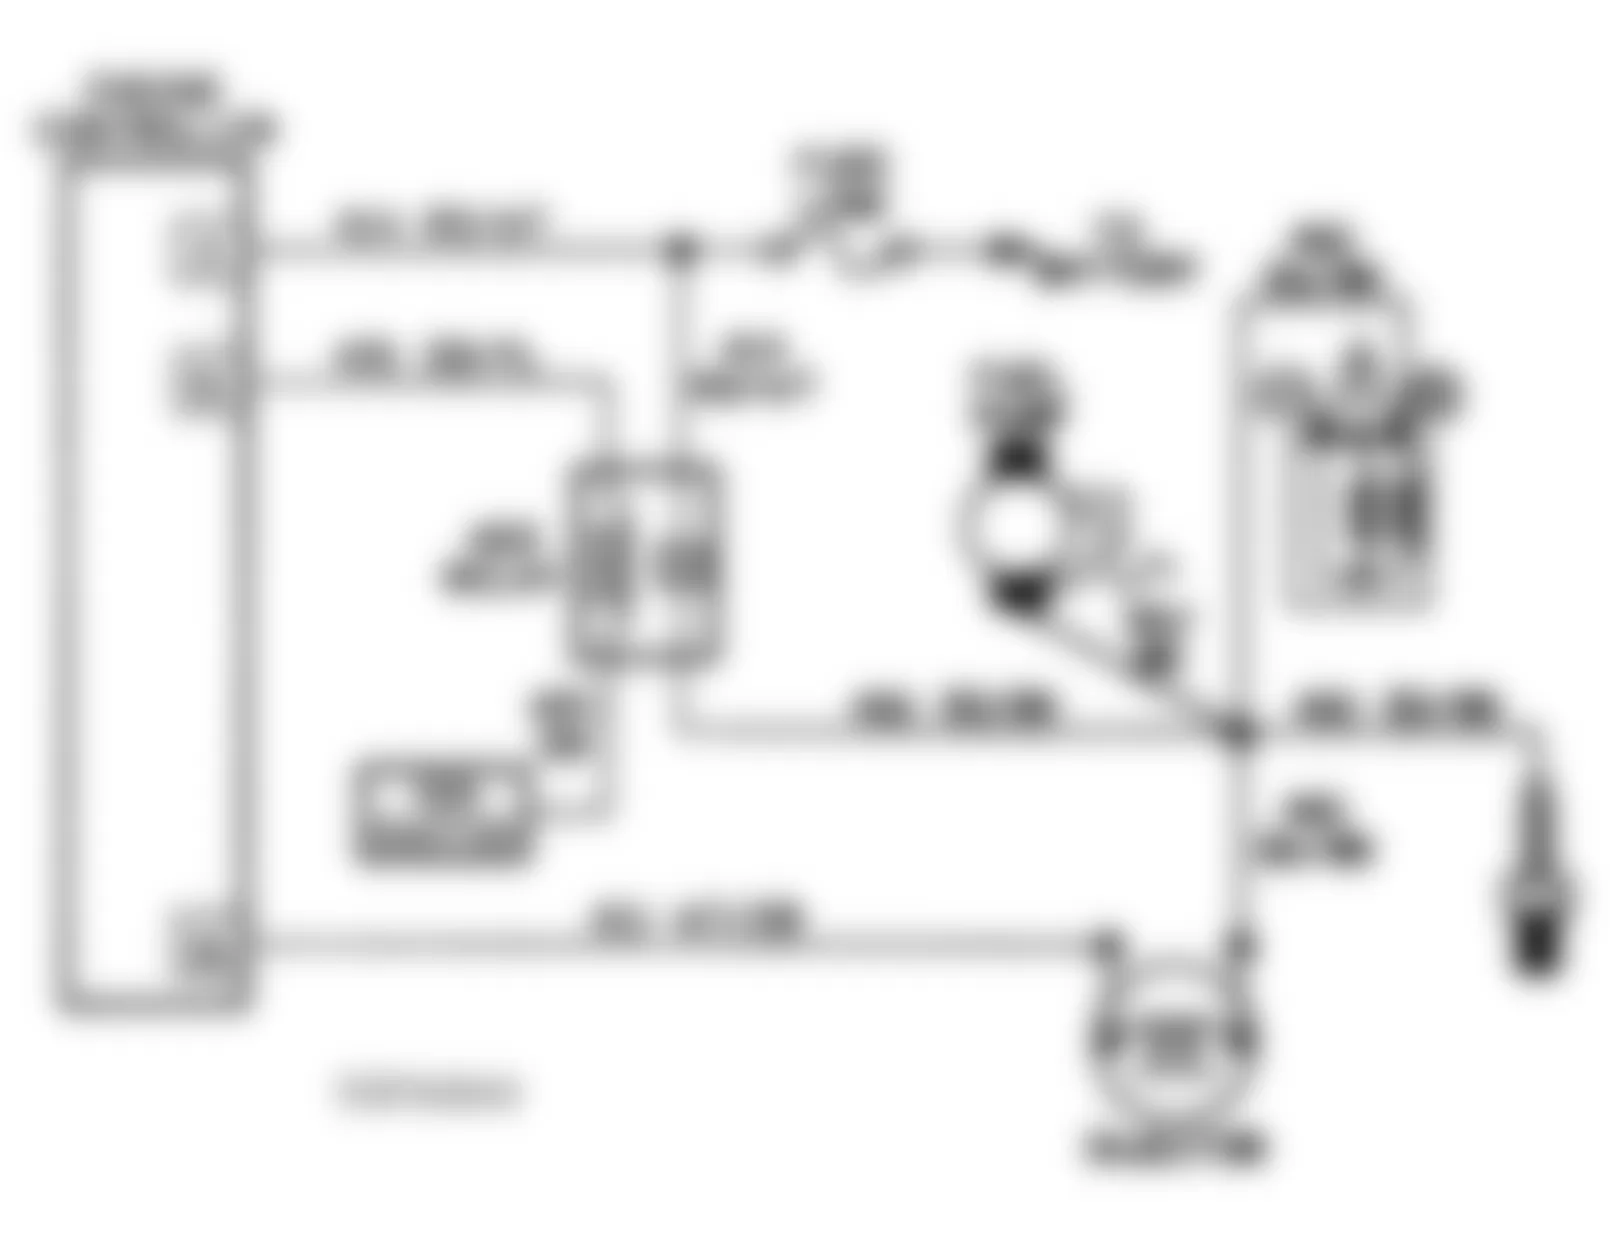 Chrysler LeBaron LX 1991 - Component Locations -  Test NS-11A Code 42, Circuit Diagram.